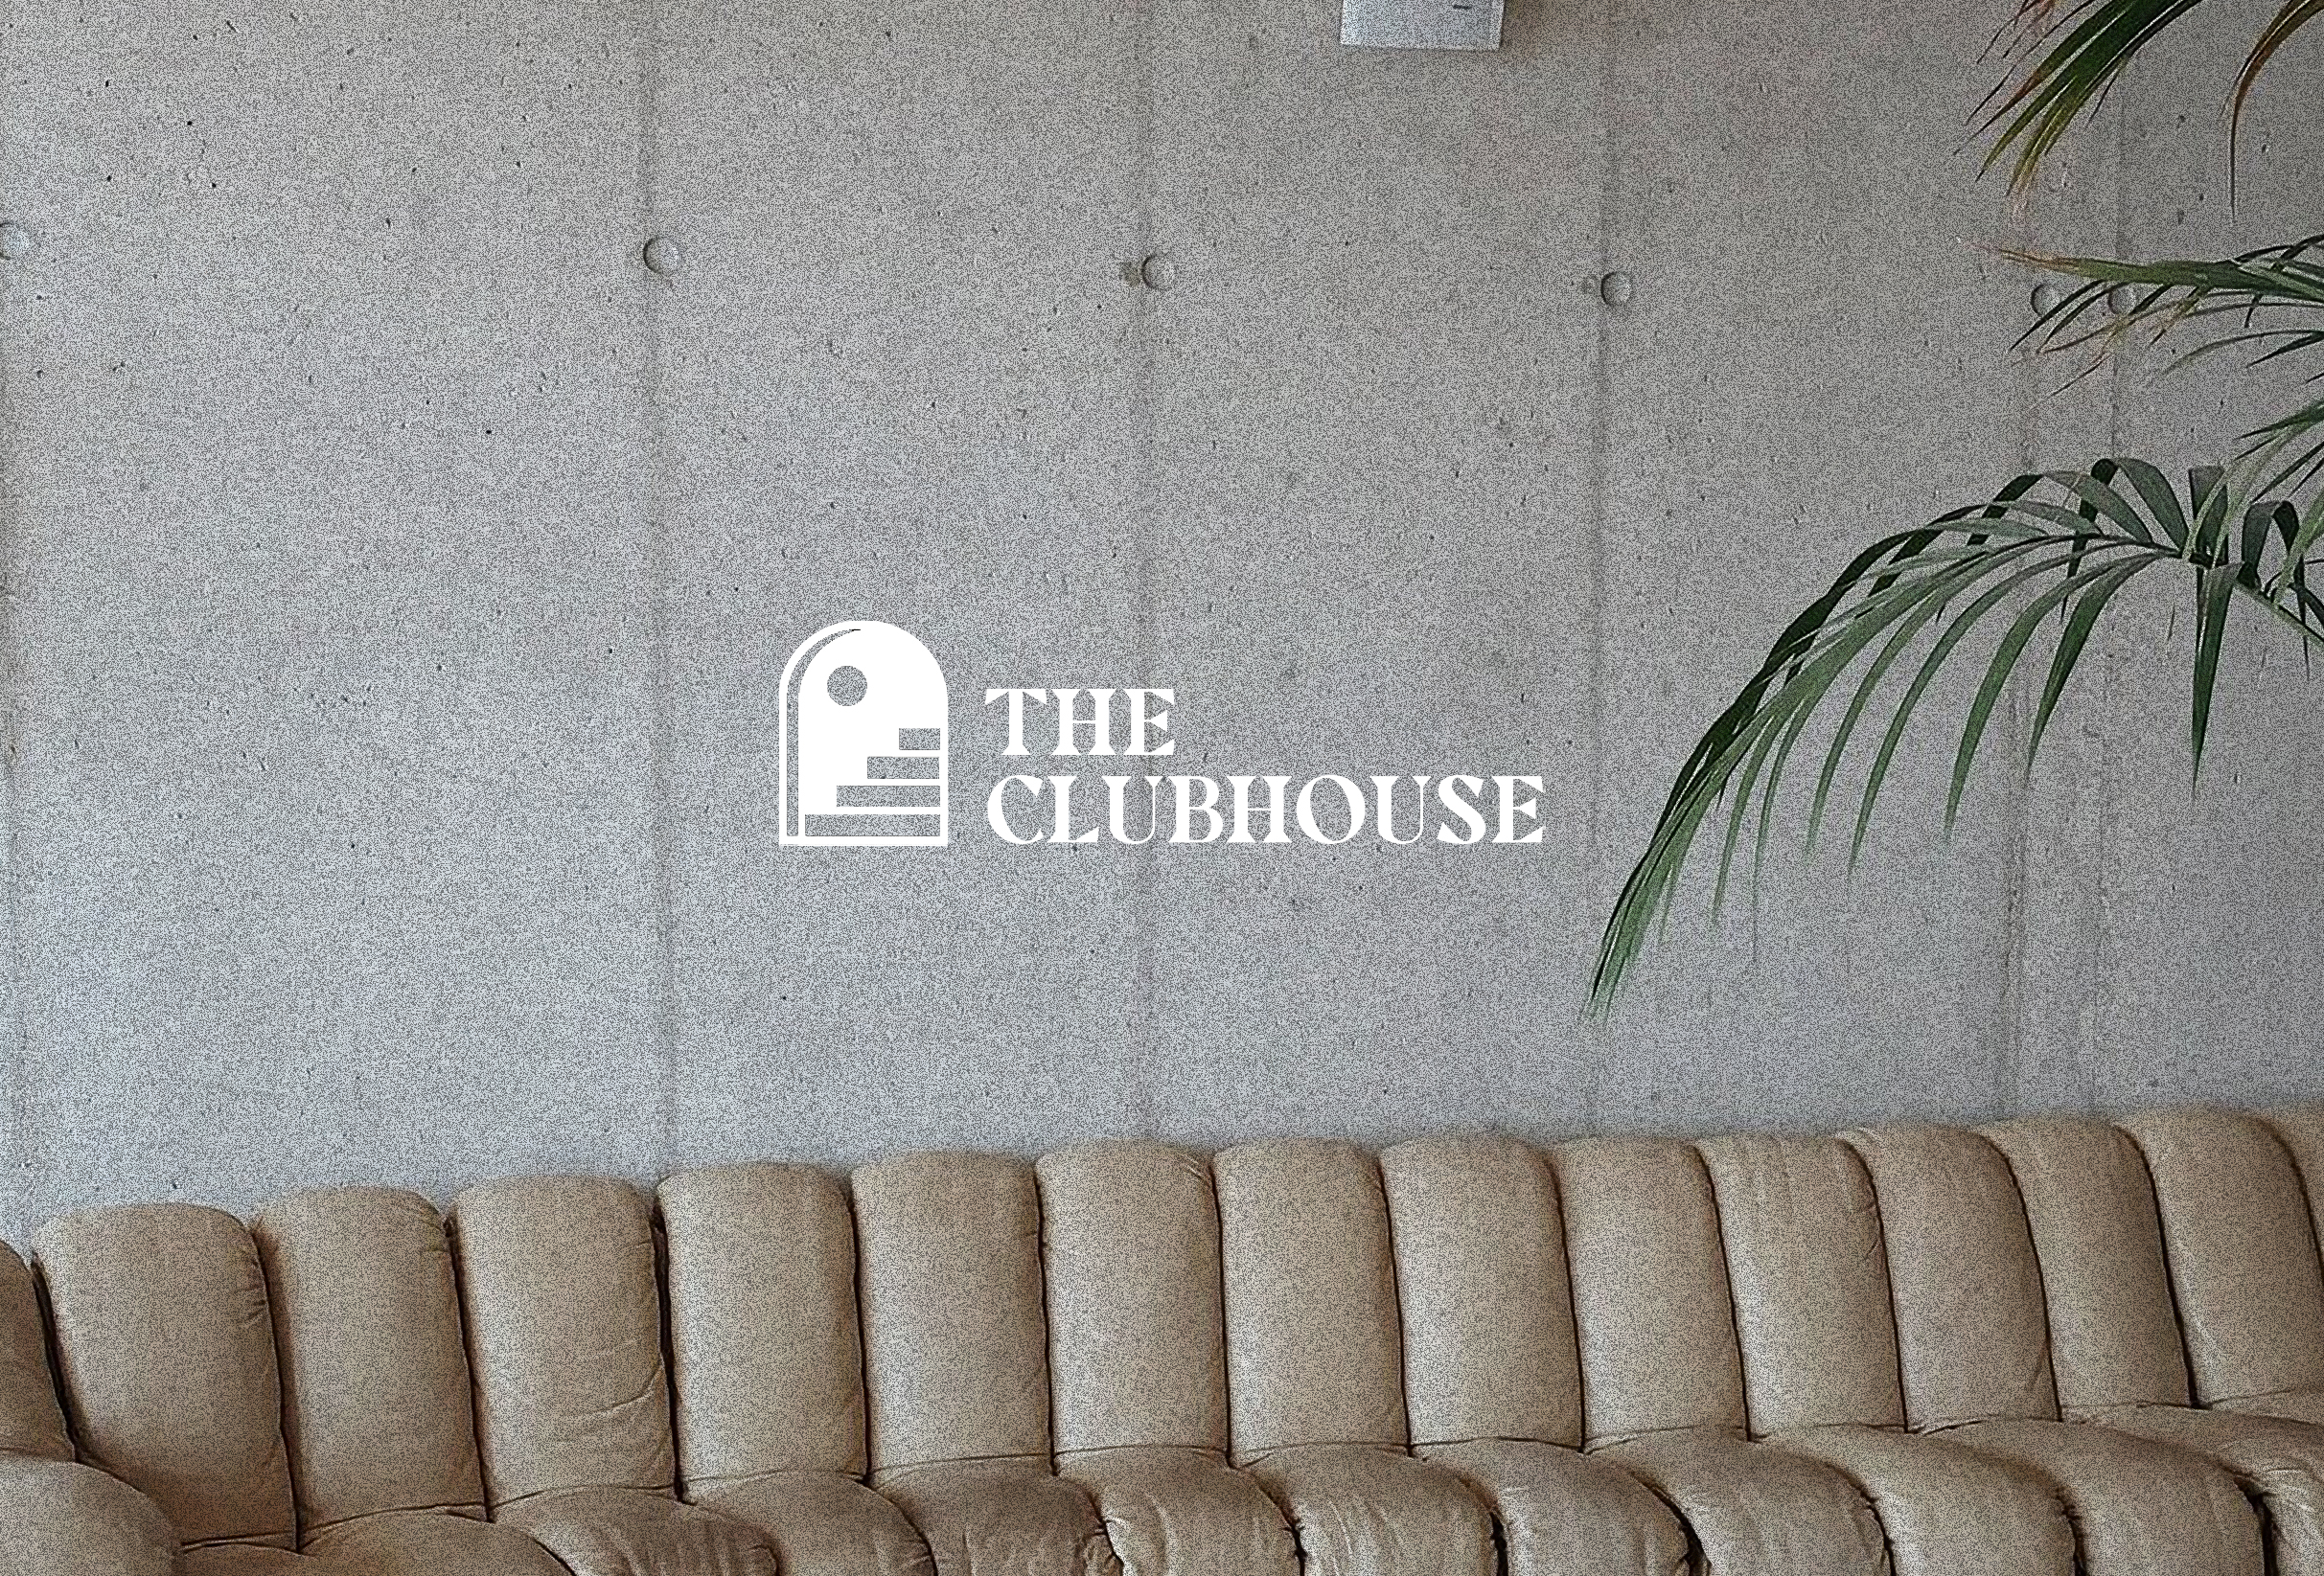 An image of The Clubhouse lounge area including a long beige leather couch leaning against a grey concrete wall and a palm tree off to the right side. A white Clubhouse logo is centered on top of the image